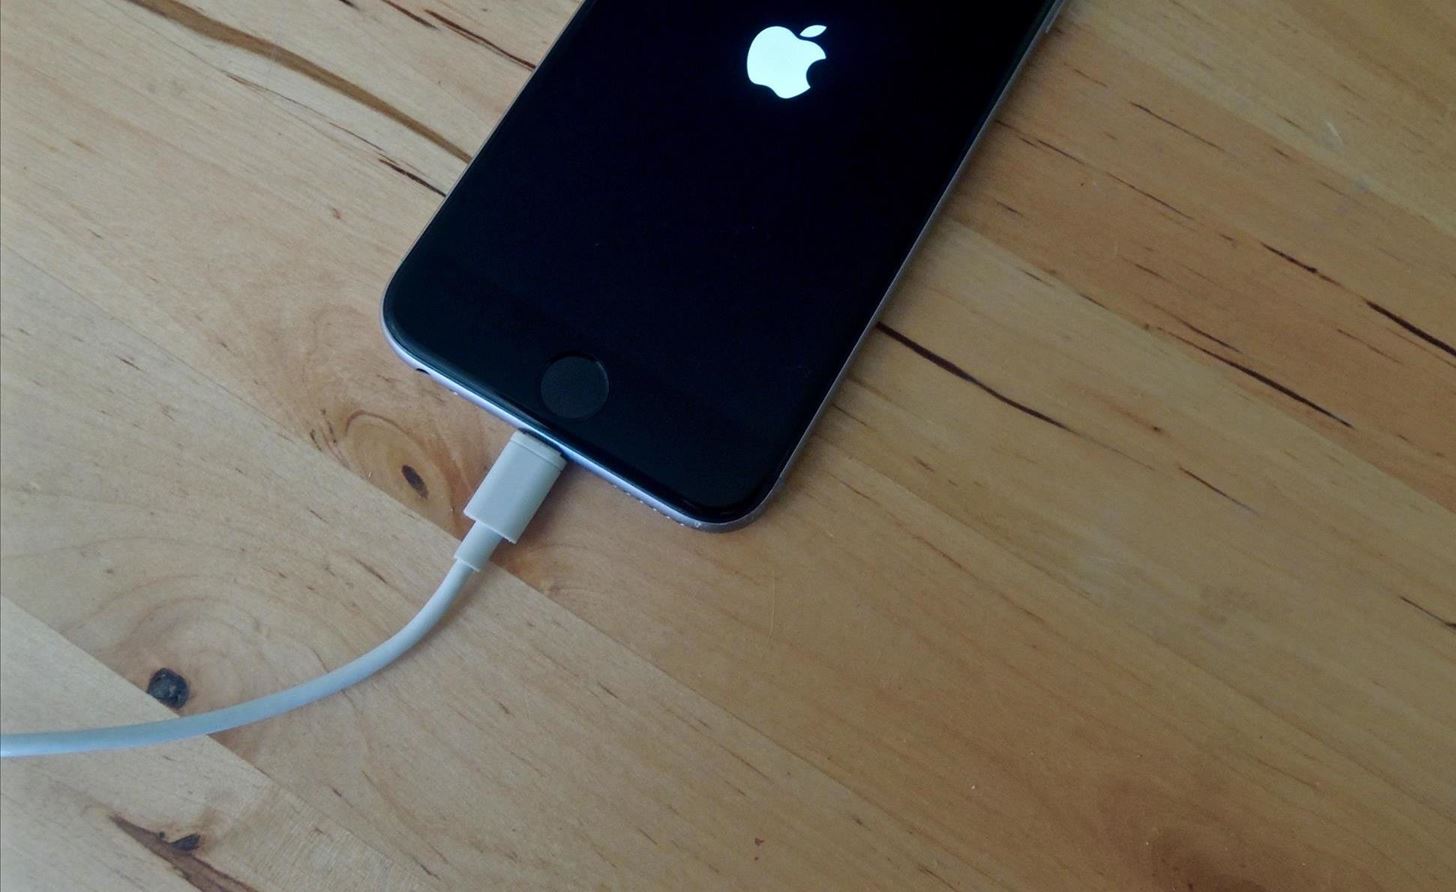 How to Turn Off Your iPhone with a Broken Power Button